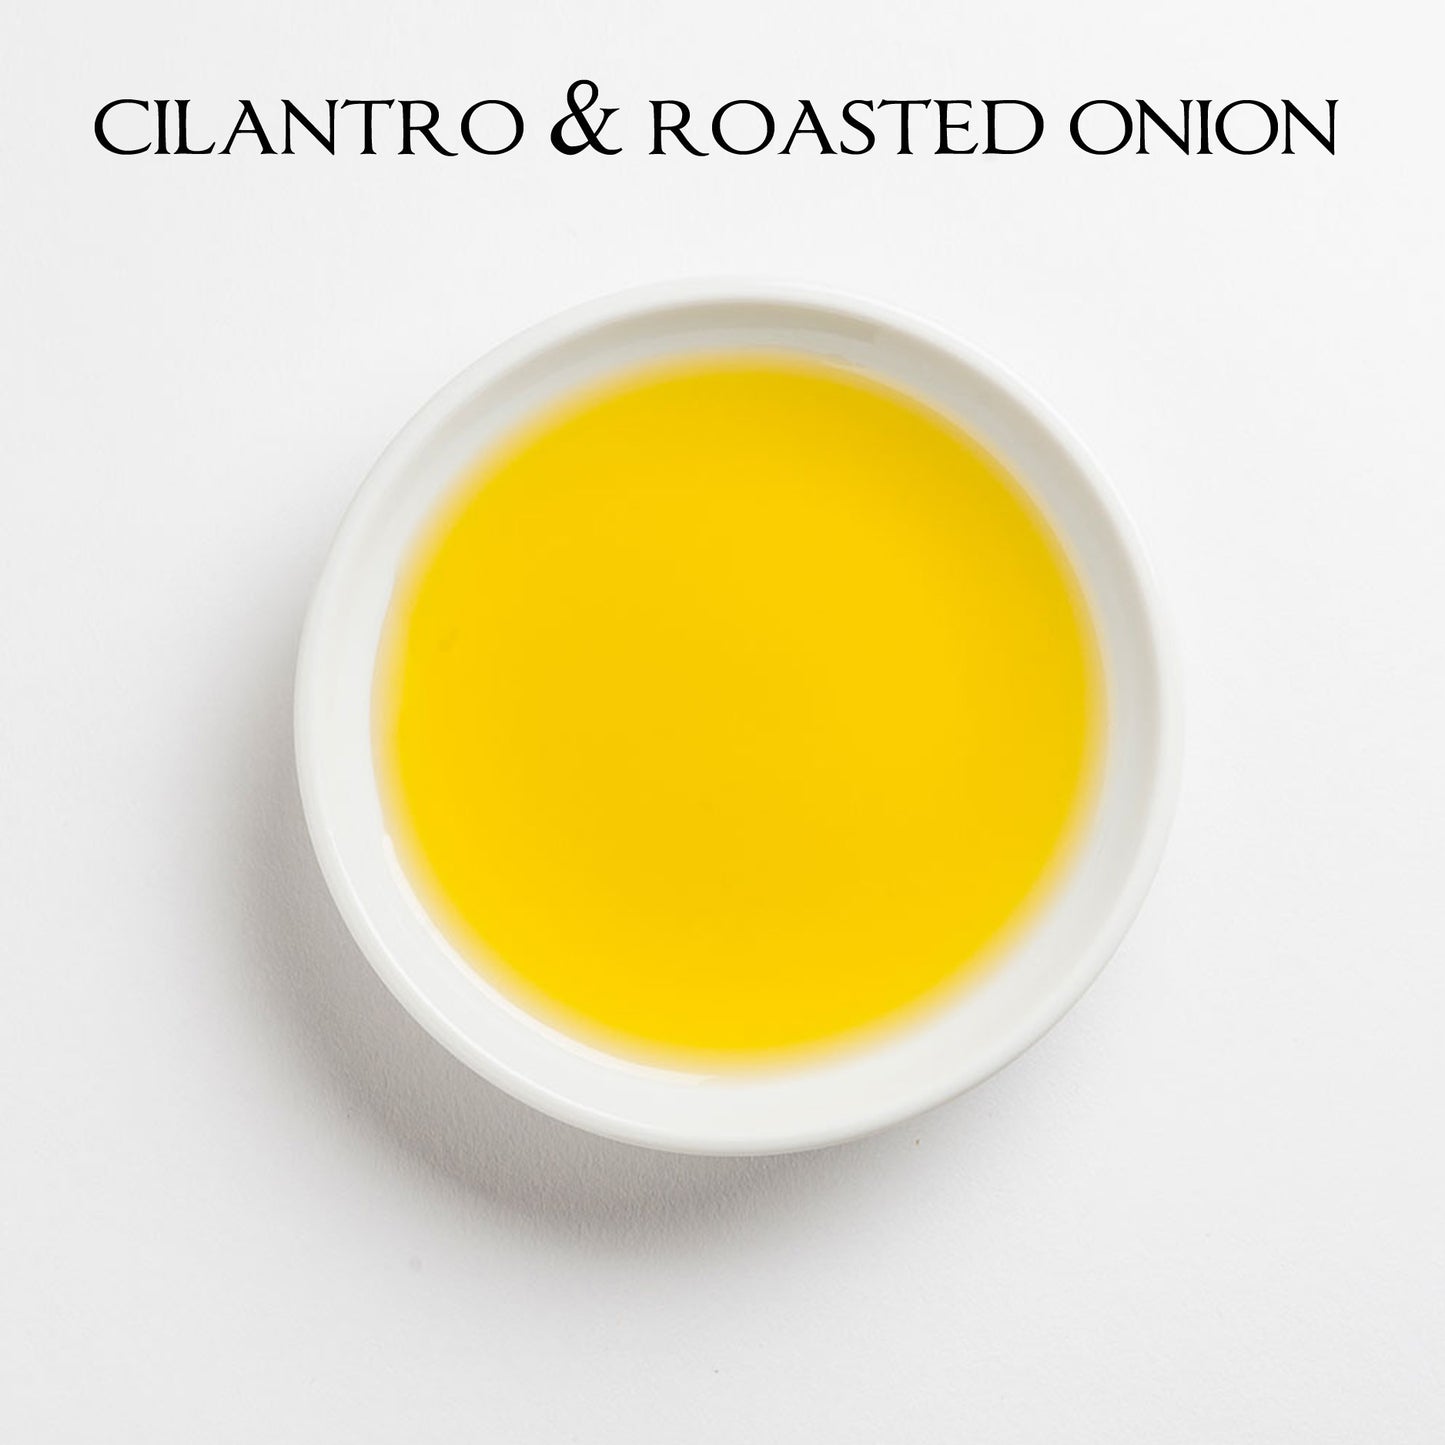 Cilantro & Roasted Onion Infused Olive Oil - Spain/Chile